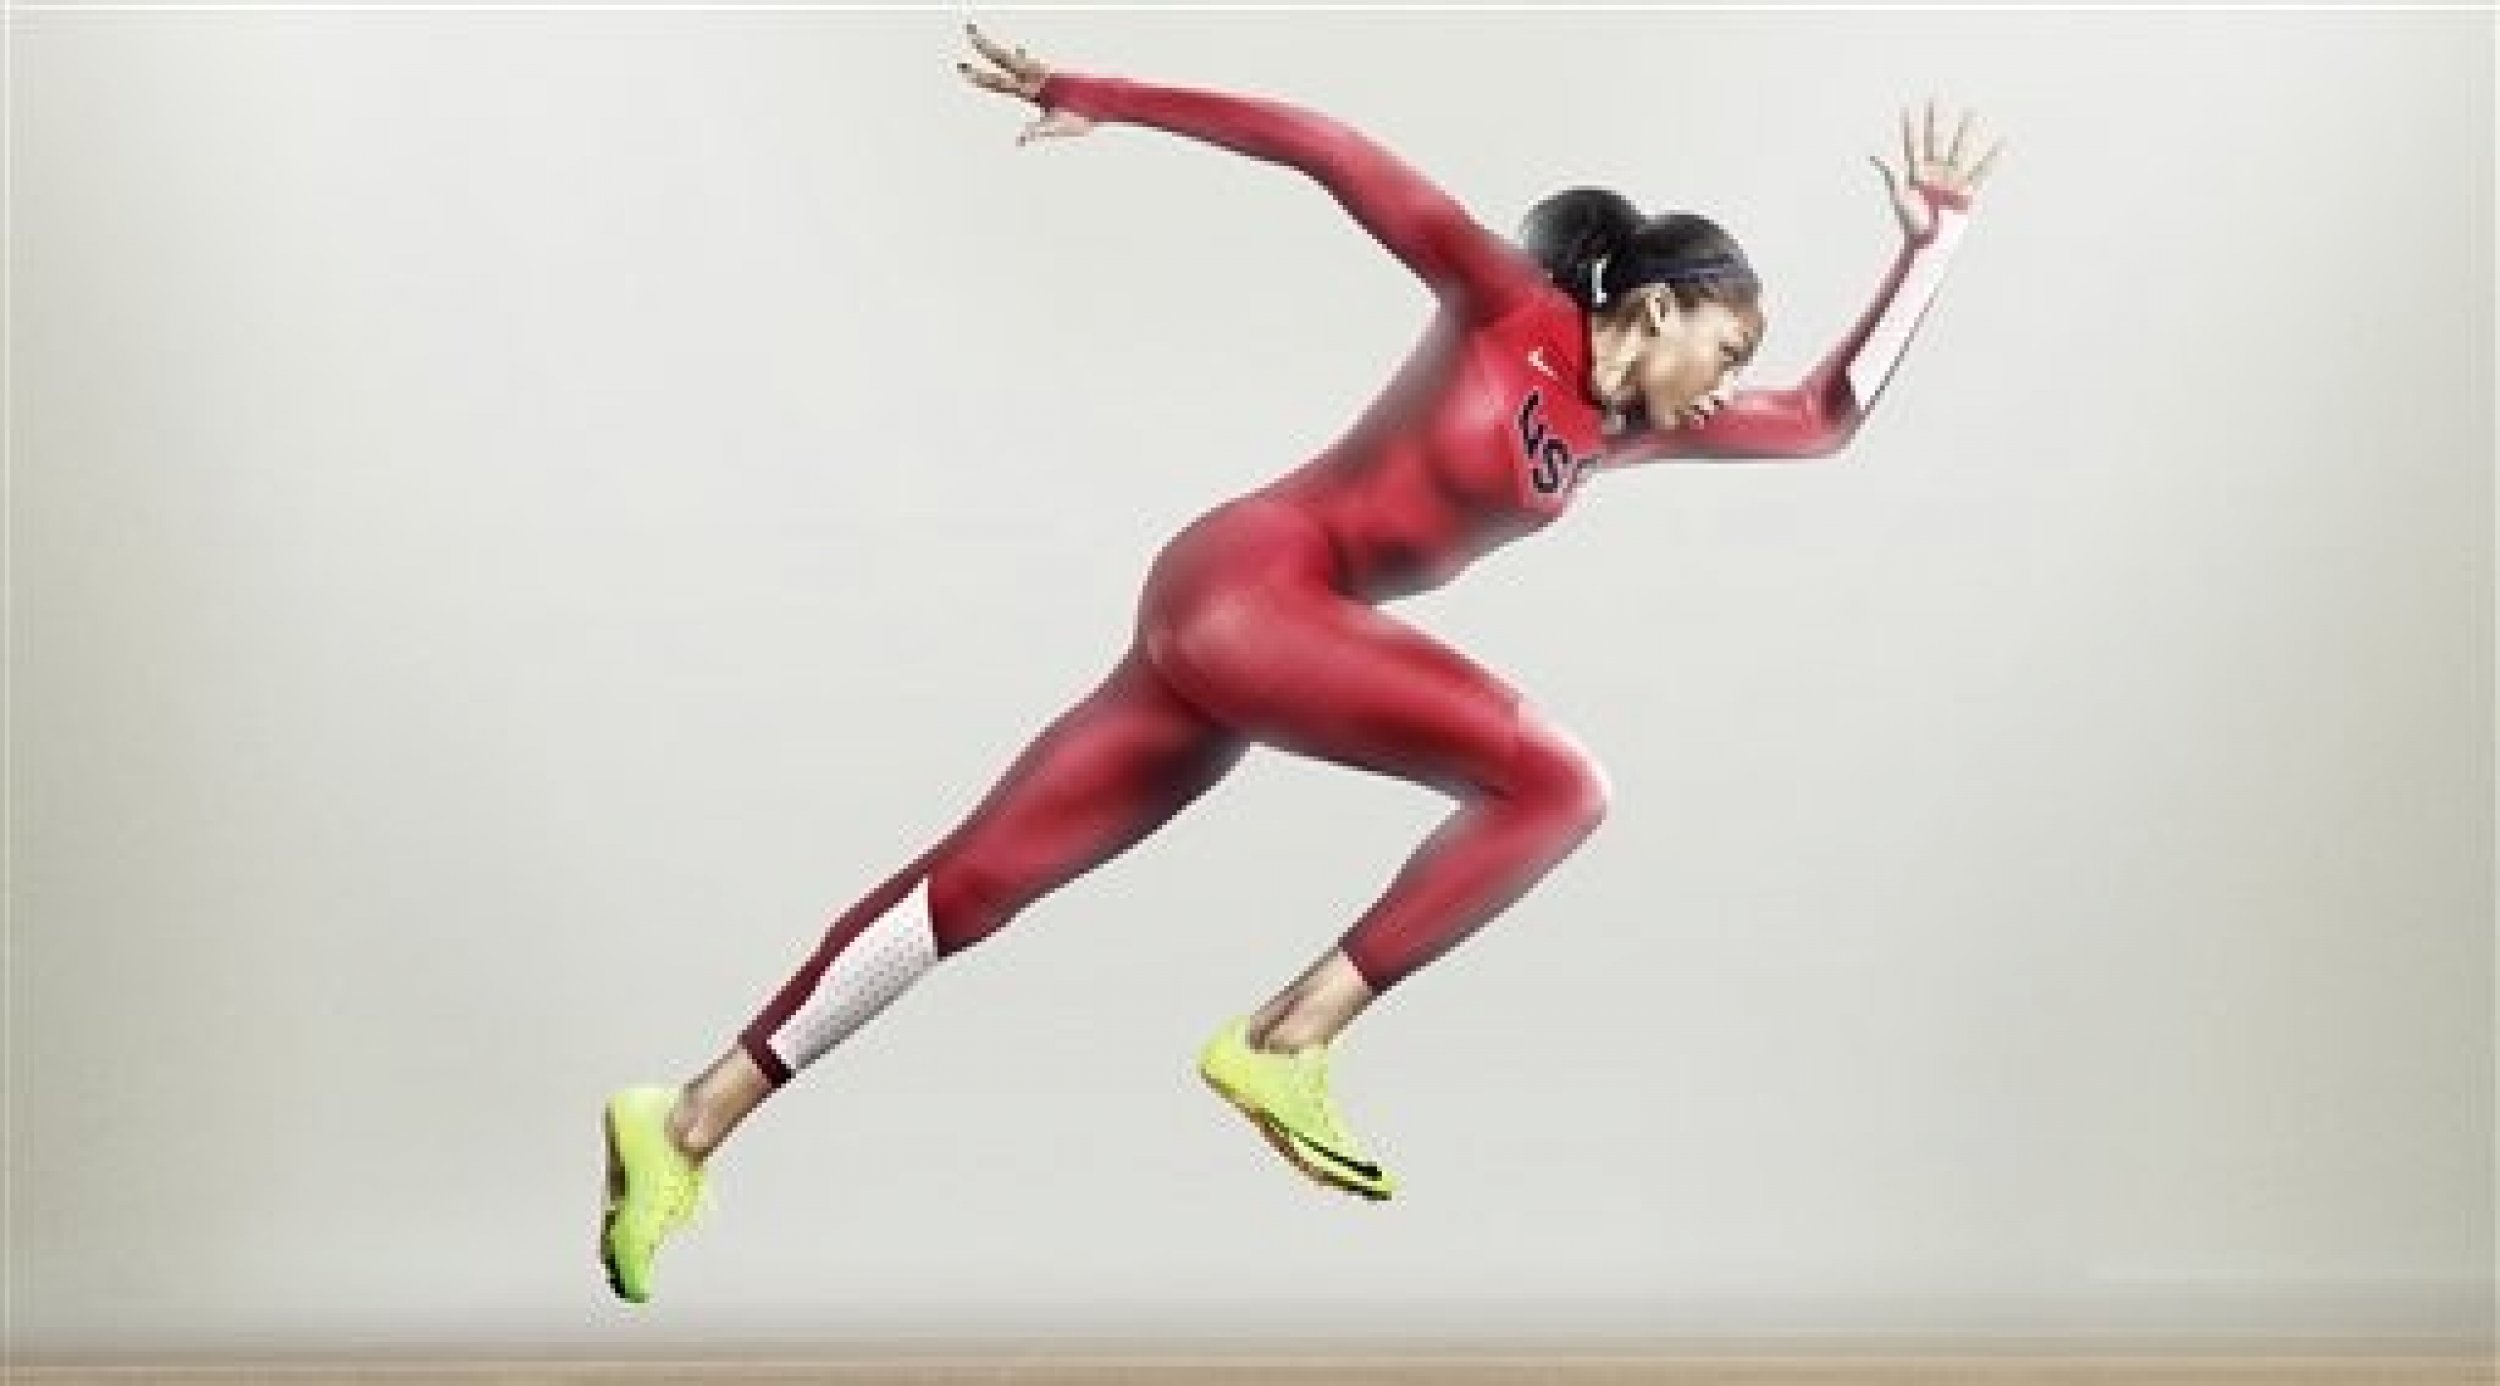 Olympics News Nike Debuts New Sprint Uniforms that Make Runners Faster